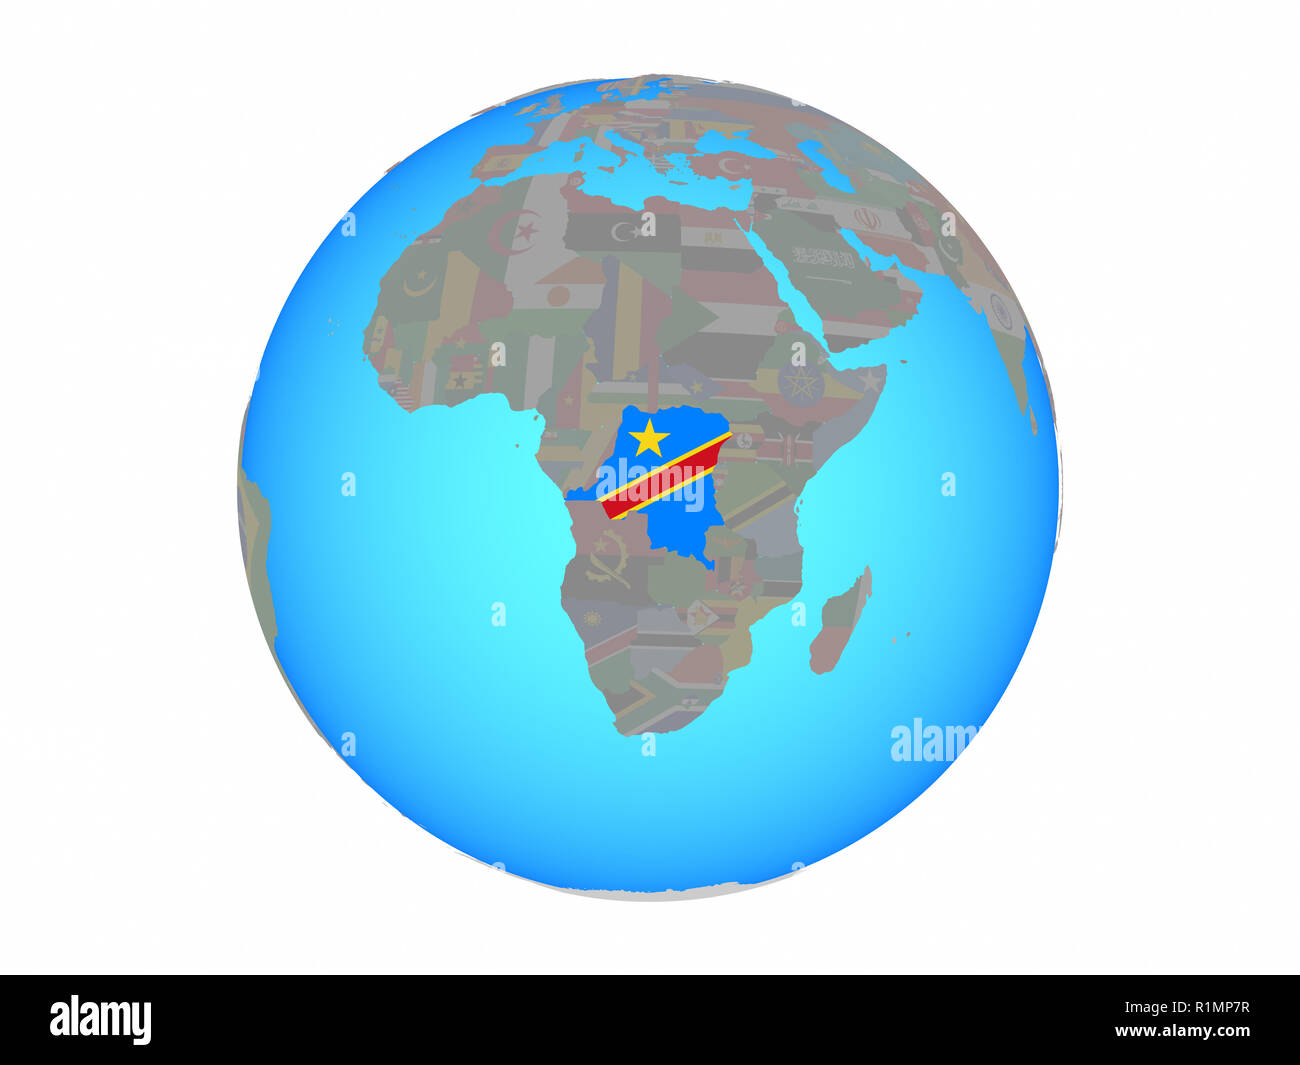 Dem Rep of Congo with national flag on blue political globe. 3D illustration isolated on white background. Stock Photo